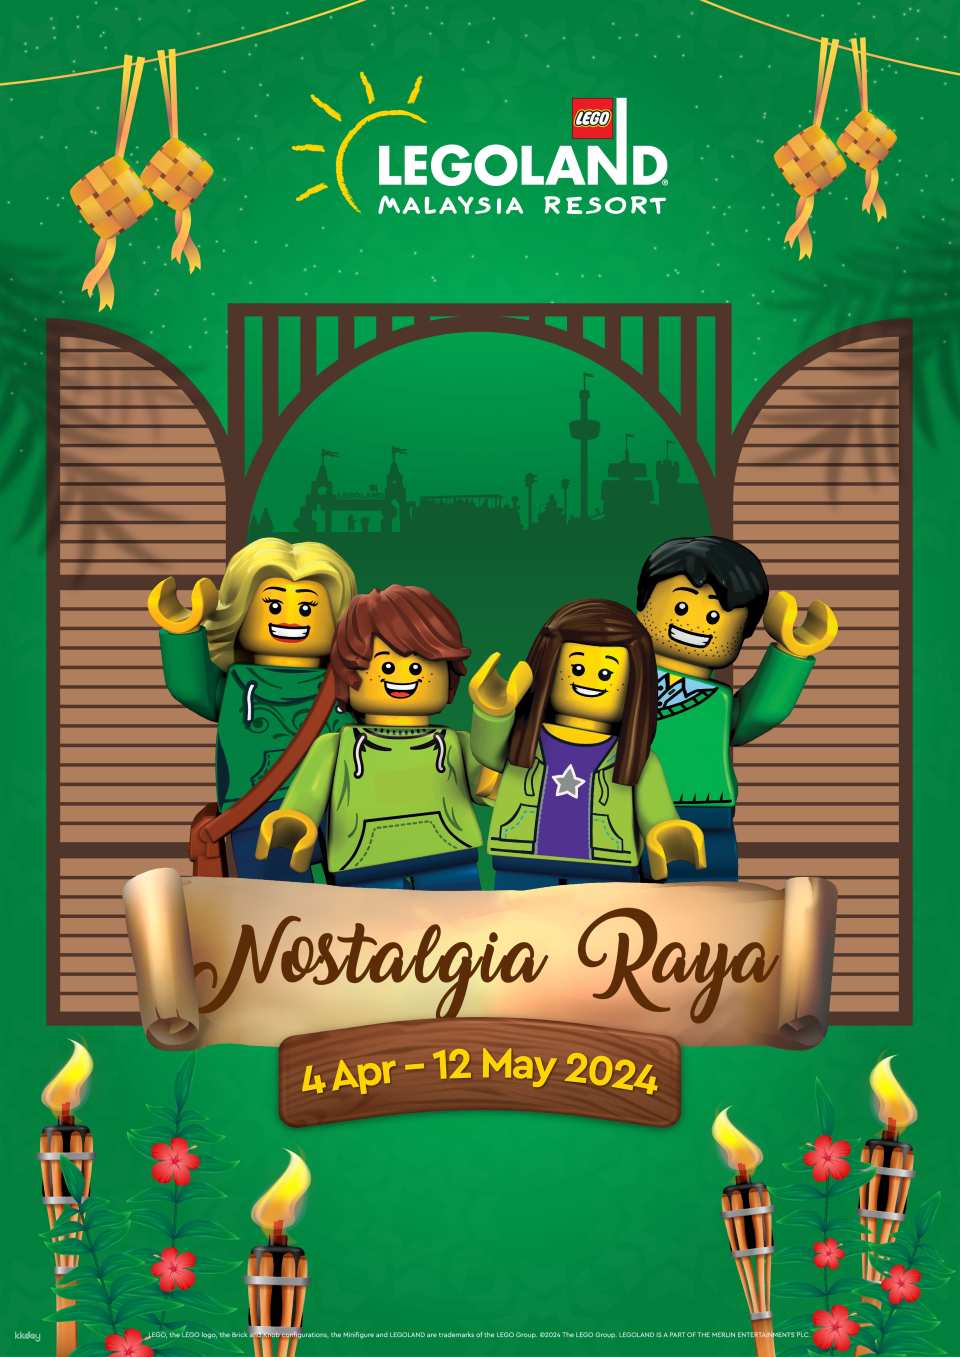 Relive the nostalgia and experience the charm of the good old days Hari Raya celebration at LEGOLAND®️ Malaysia Resort.